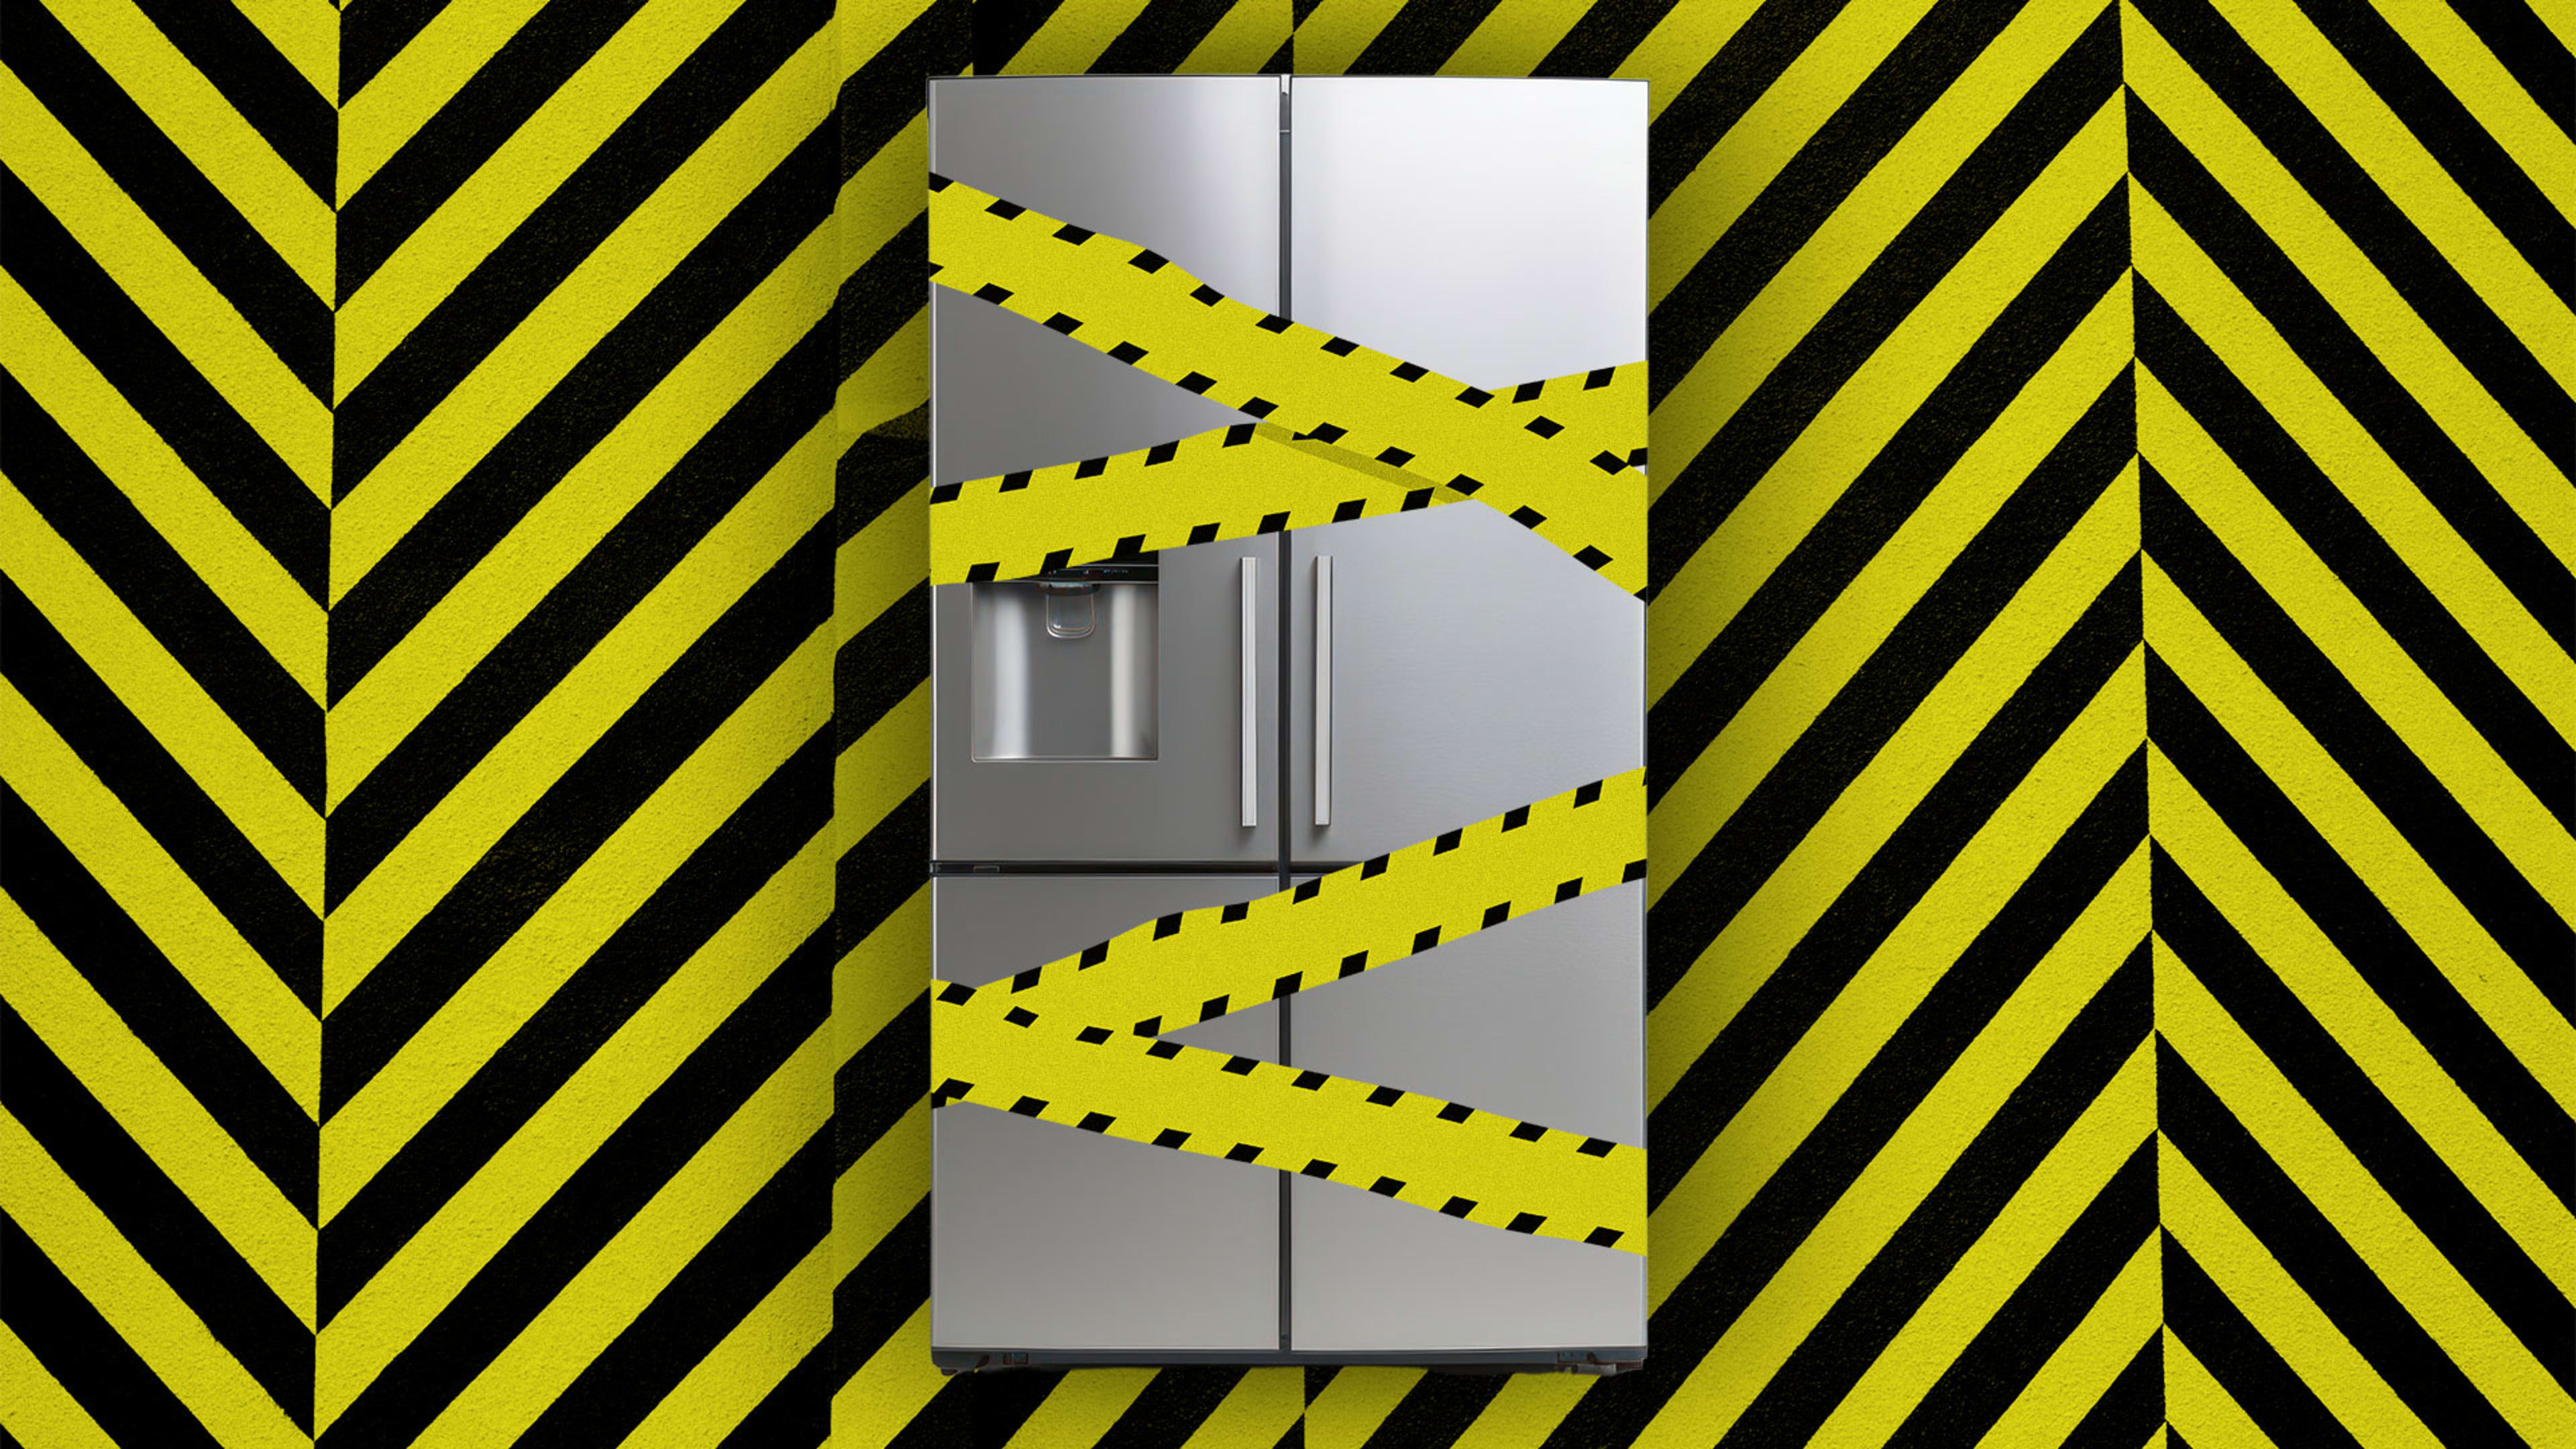 The 10 most dangerous appliances in your home might surprise you